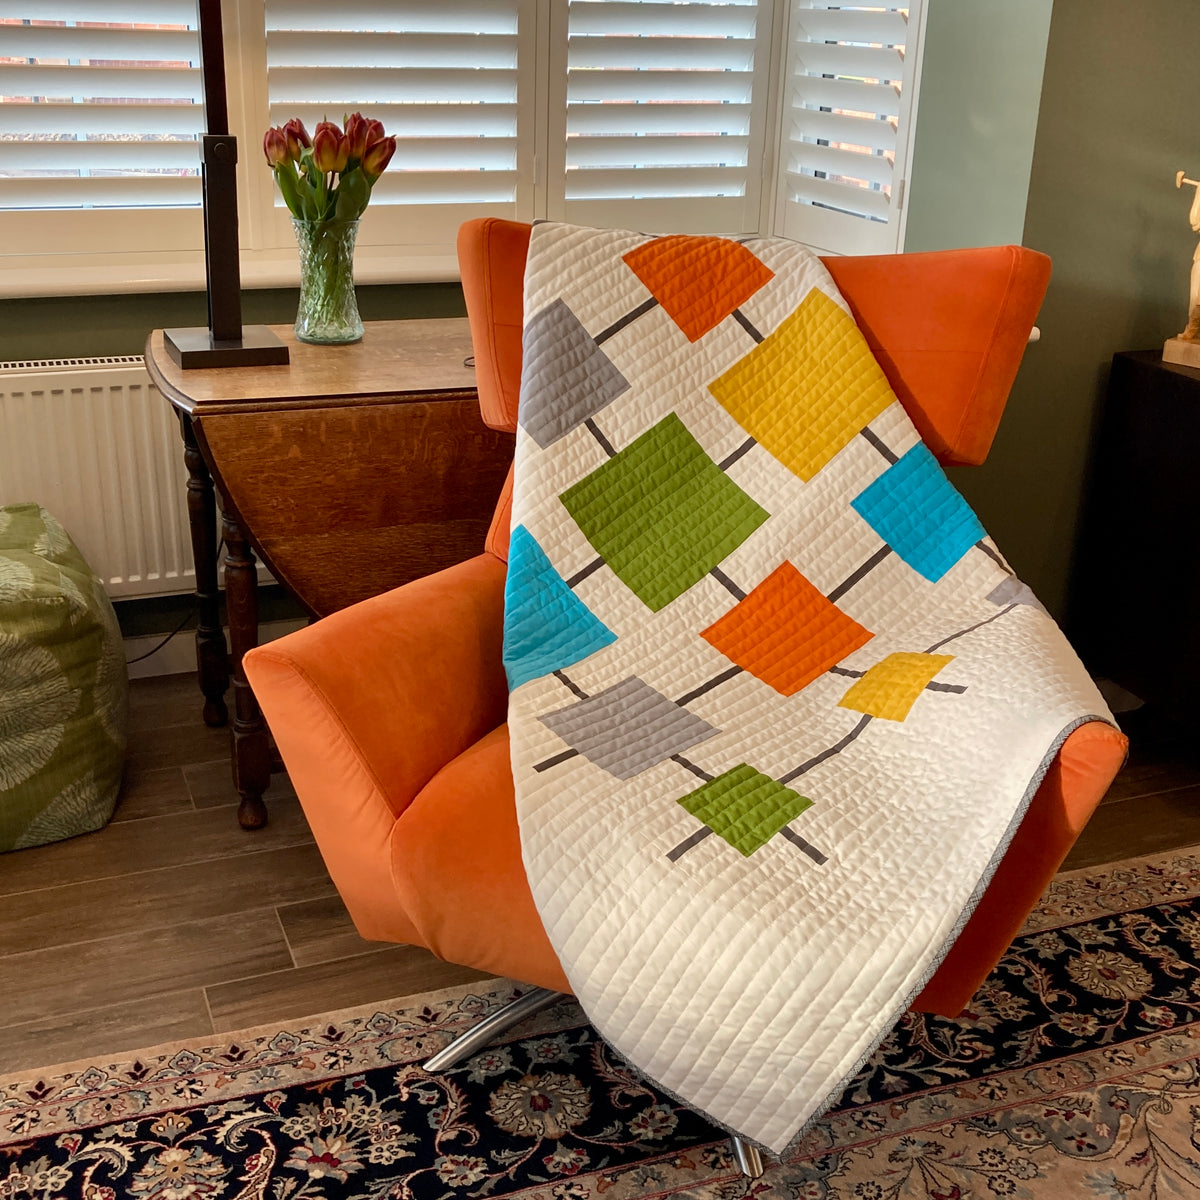 White quilt with brightly colored squares on an orange mid-century modern chair